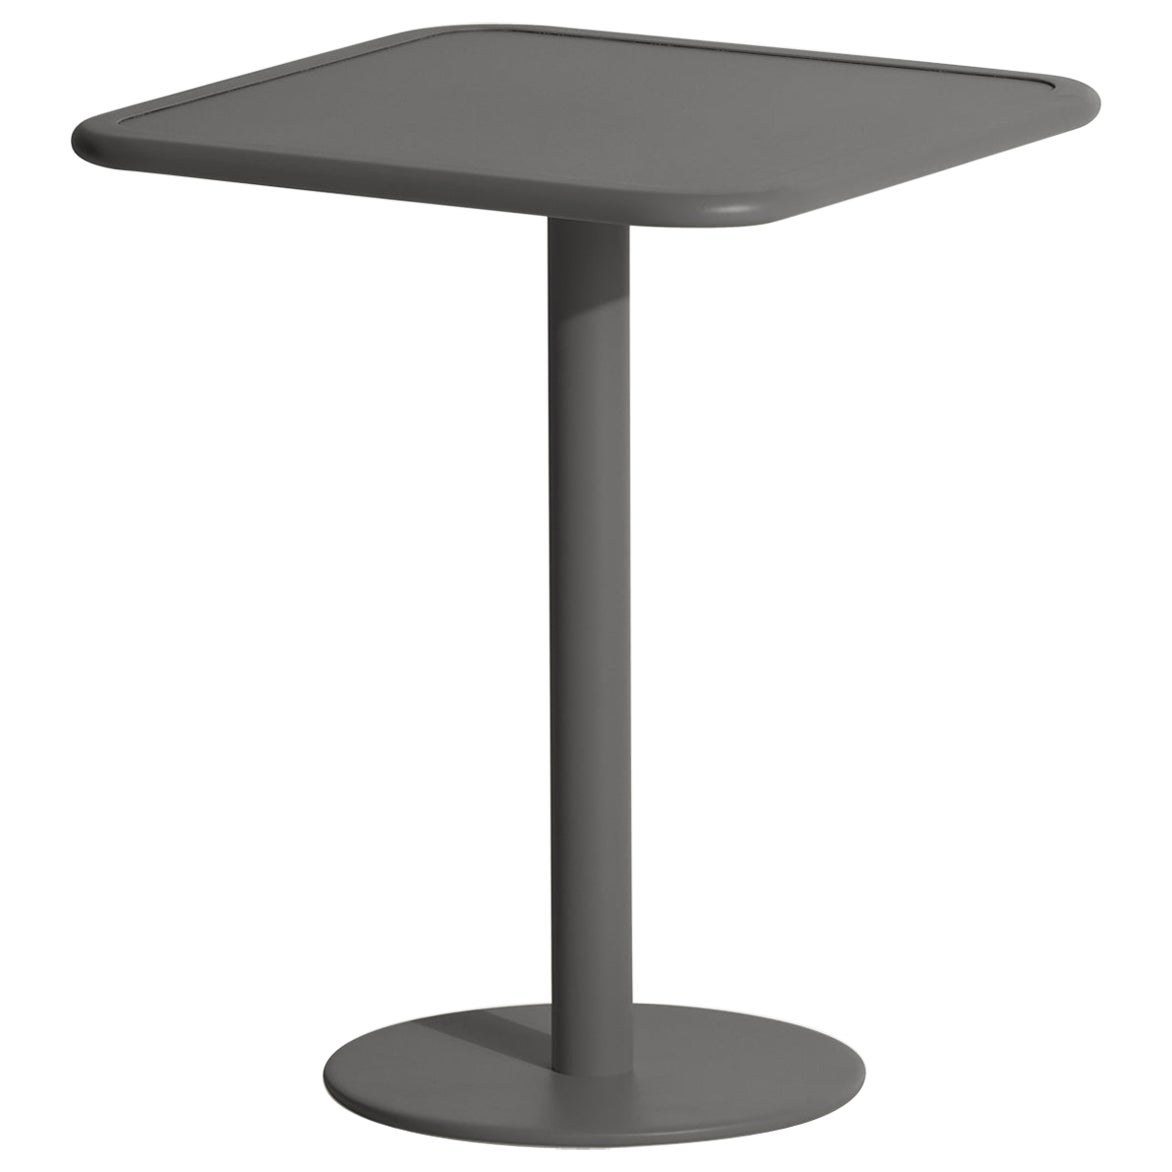 Petite Friture Week-End Bistro Square Dining Table in Anthracite Aluminium, 2017